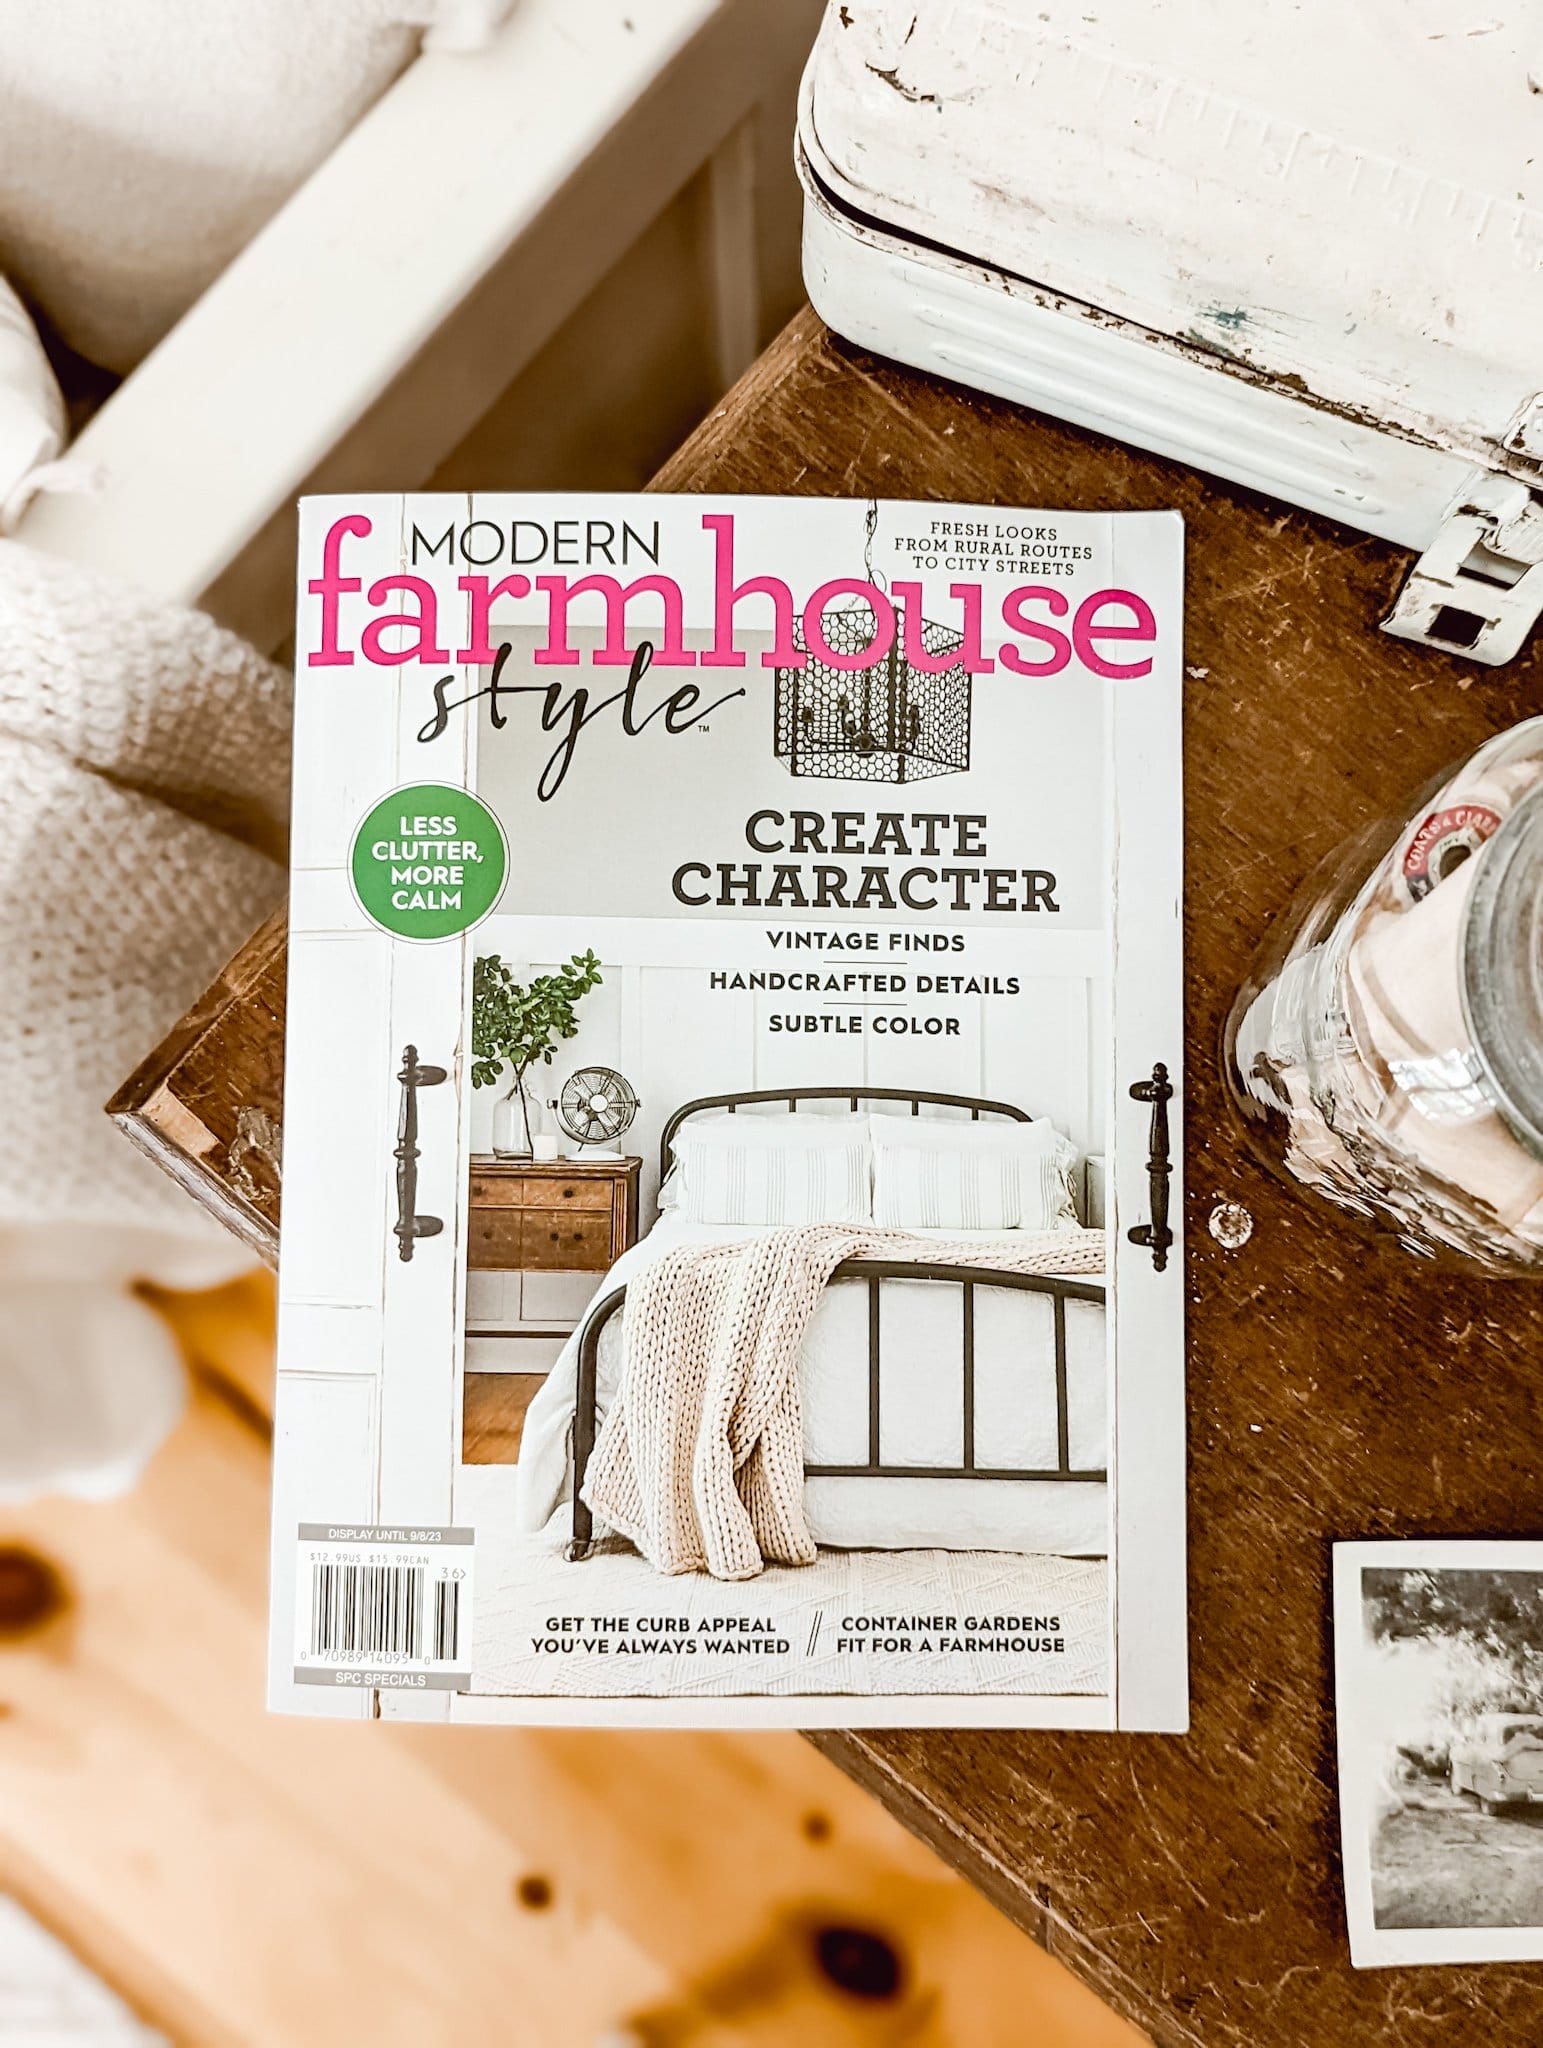 We Made The Cover of Modern Farmhouse Style Magazine!